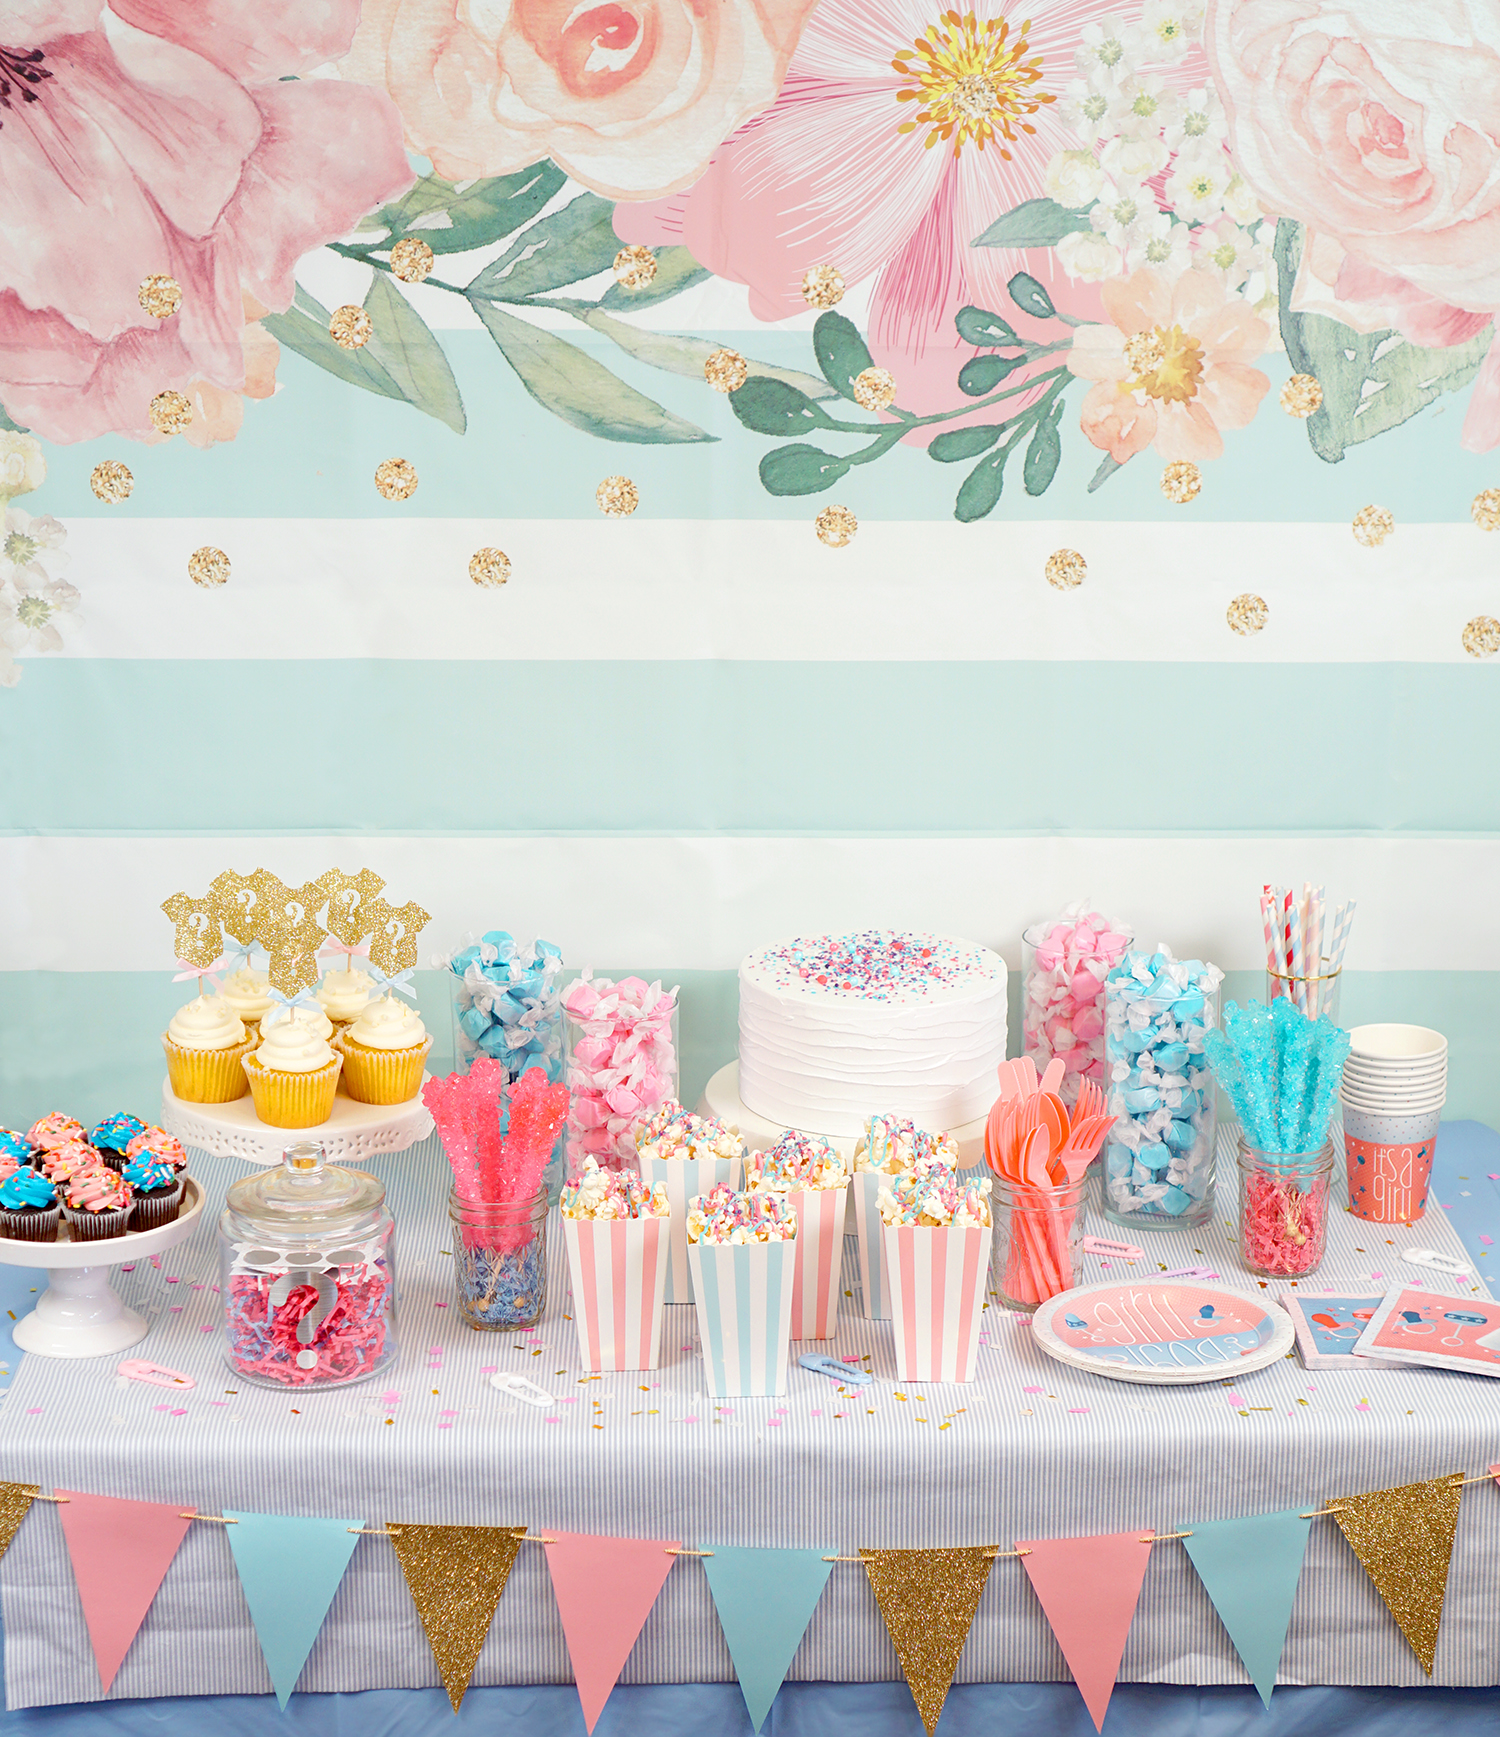 Gender Reveal Party Ideas pic